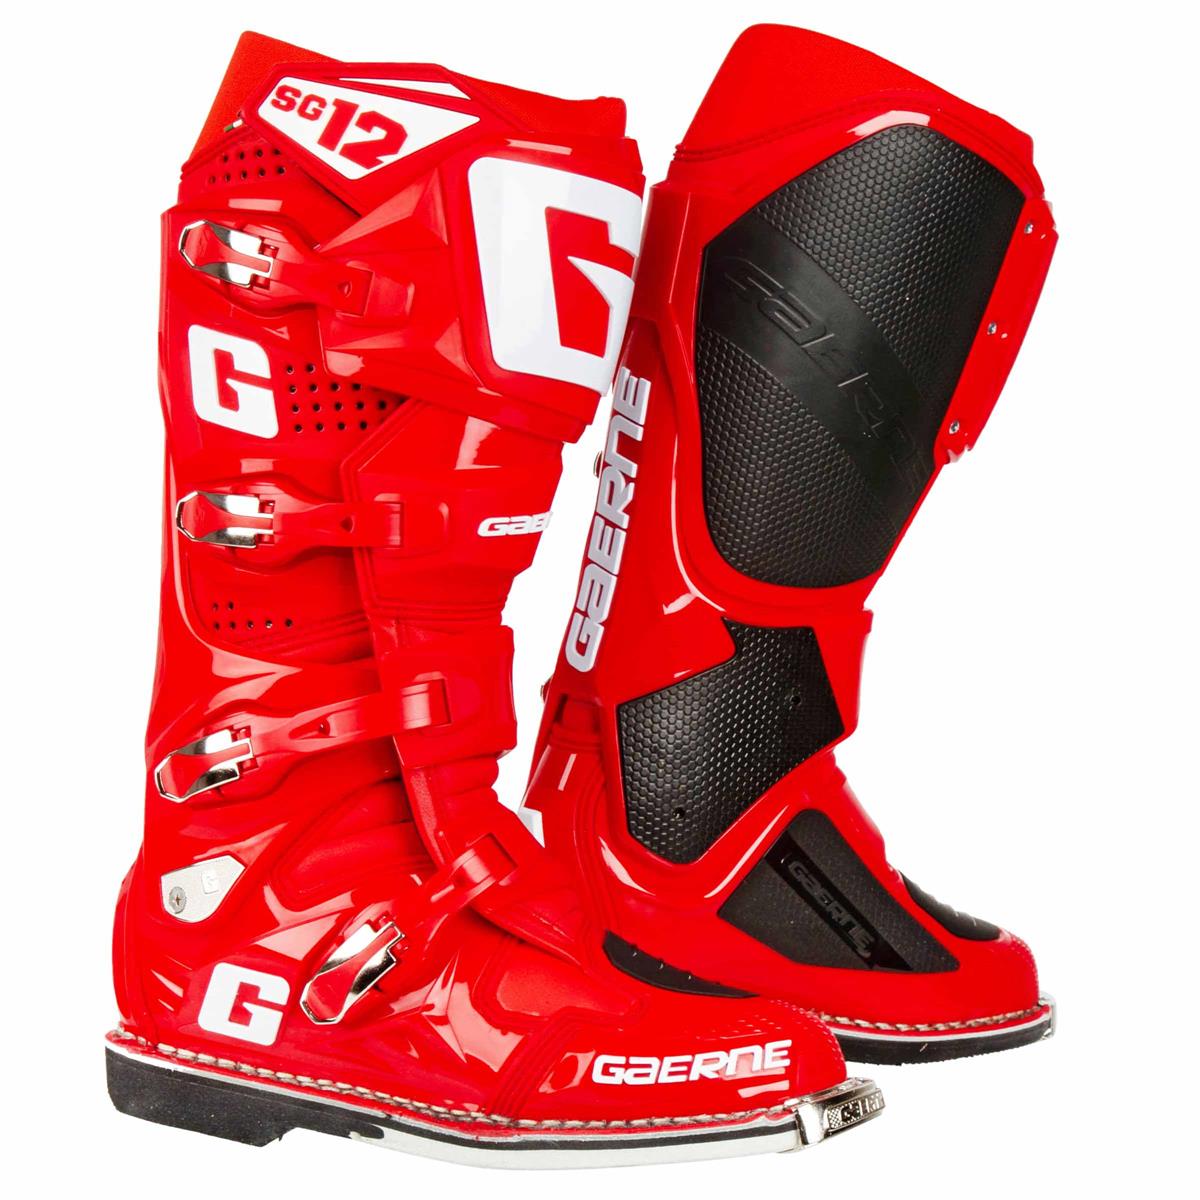 Gaerne Motocross-Stiefel SG 12 Solid Rot